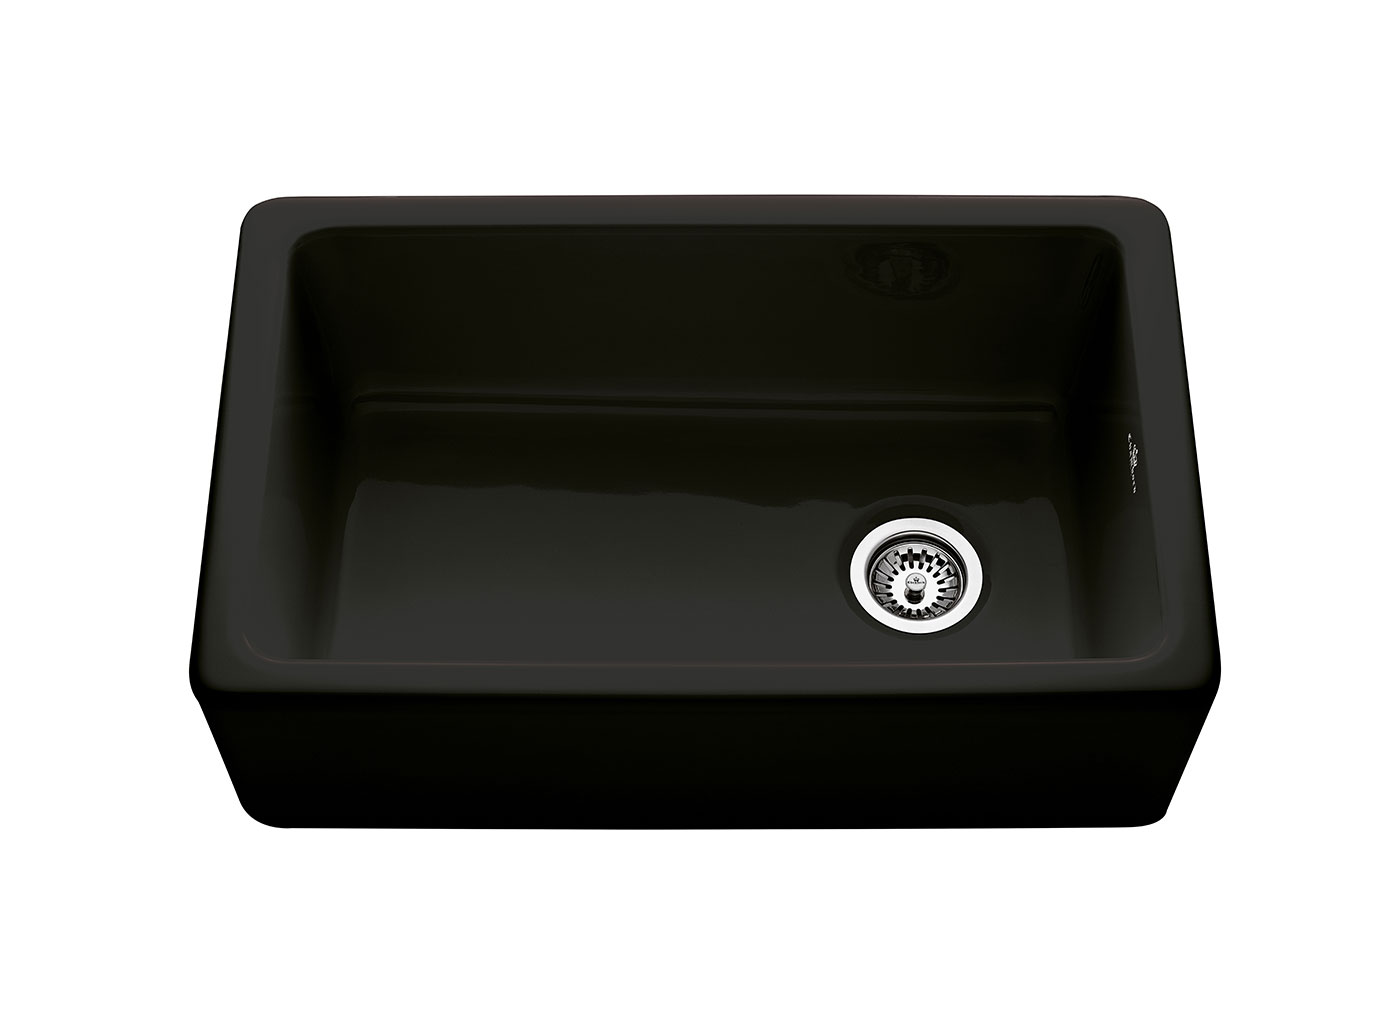 Chambord sinks are a statement as well as an object of utility at home in the grandest of kitchens. These kitchen sinks are made with ceramic